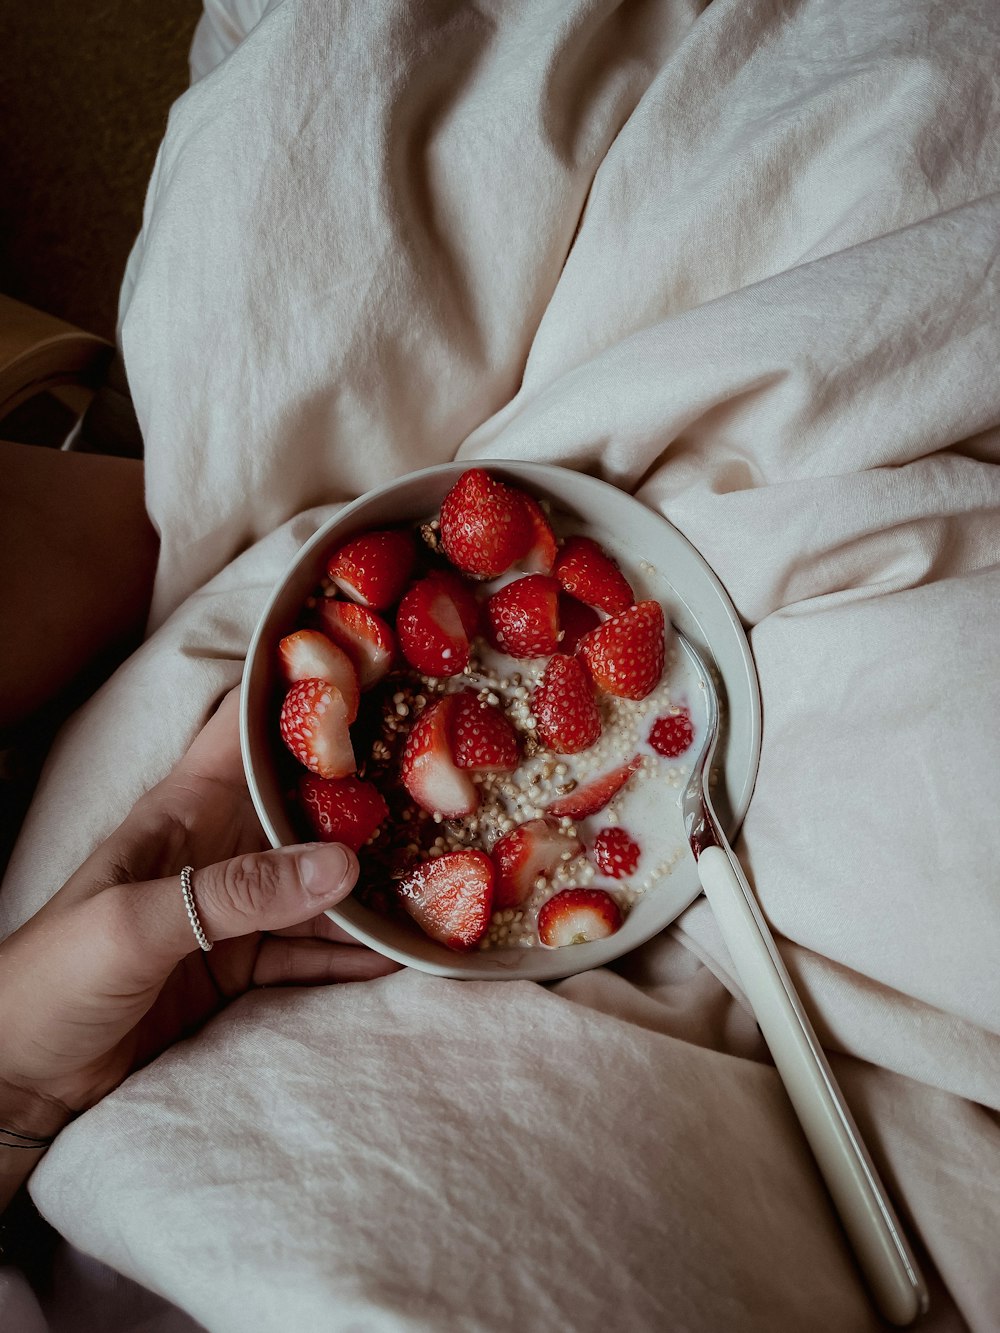 person holding stainless steel spoon with strawberries